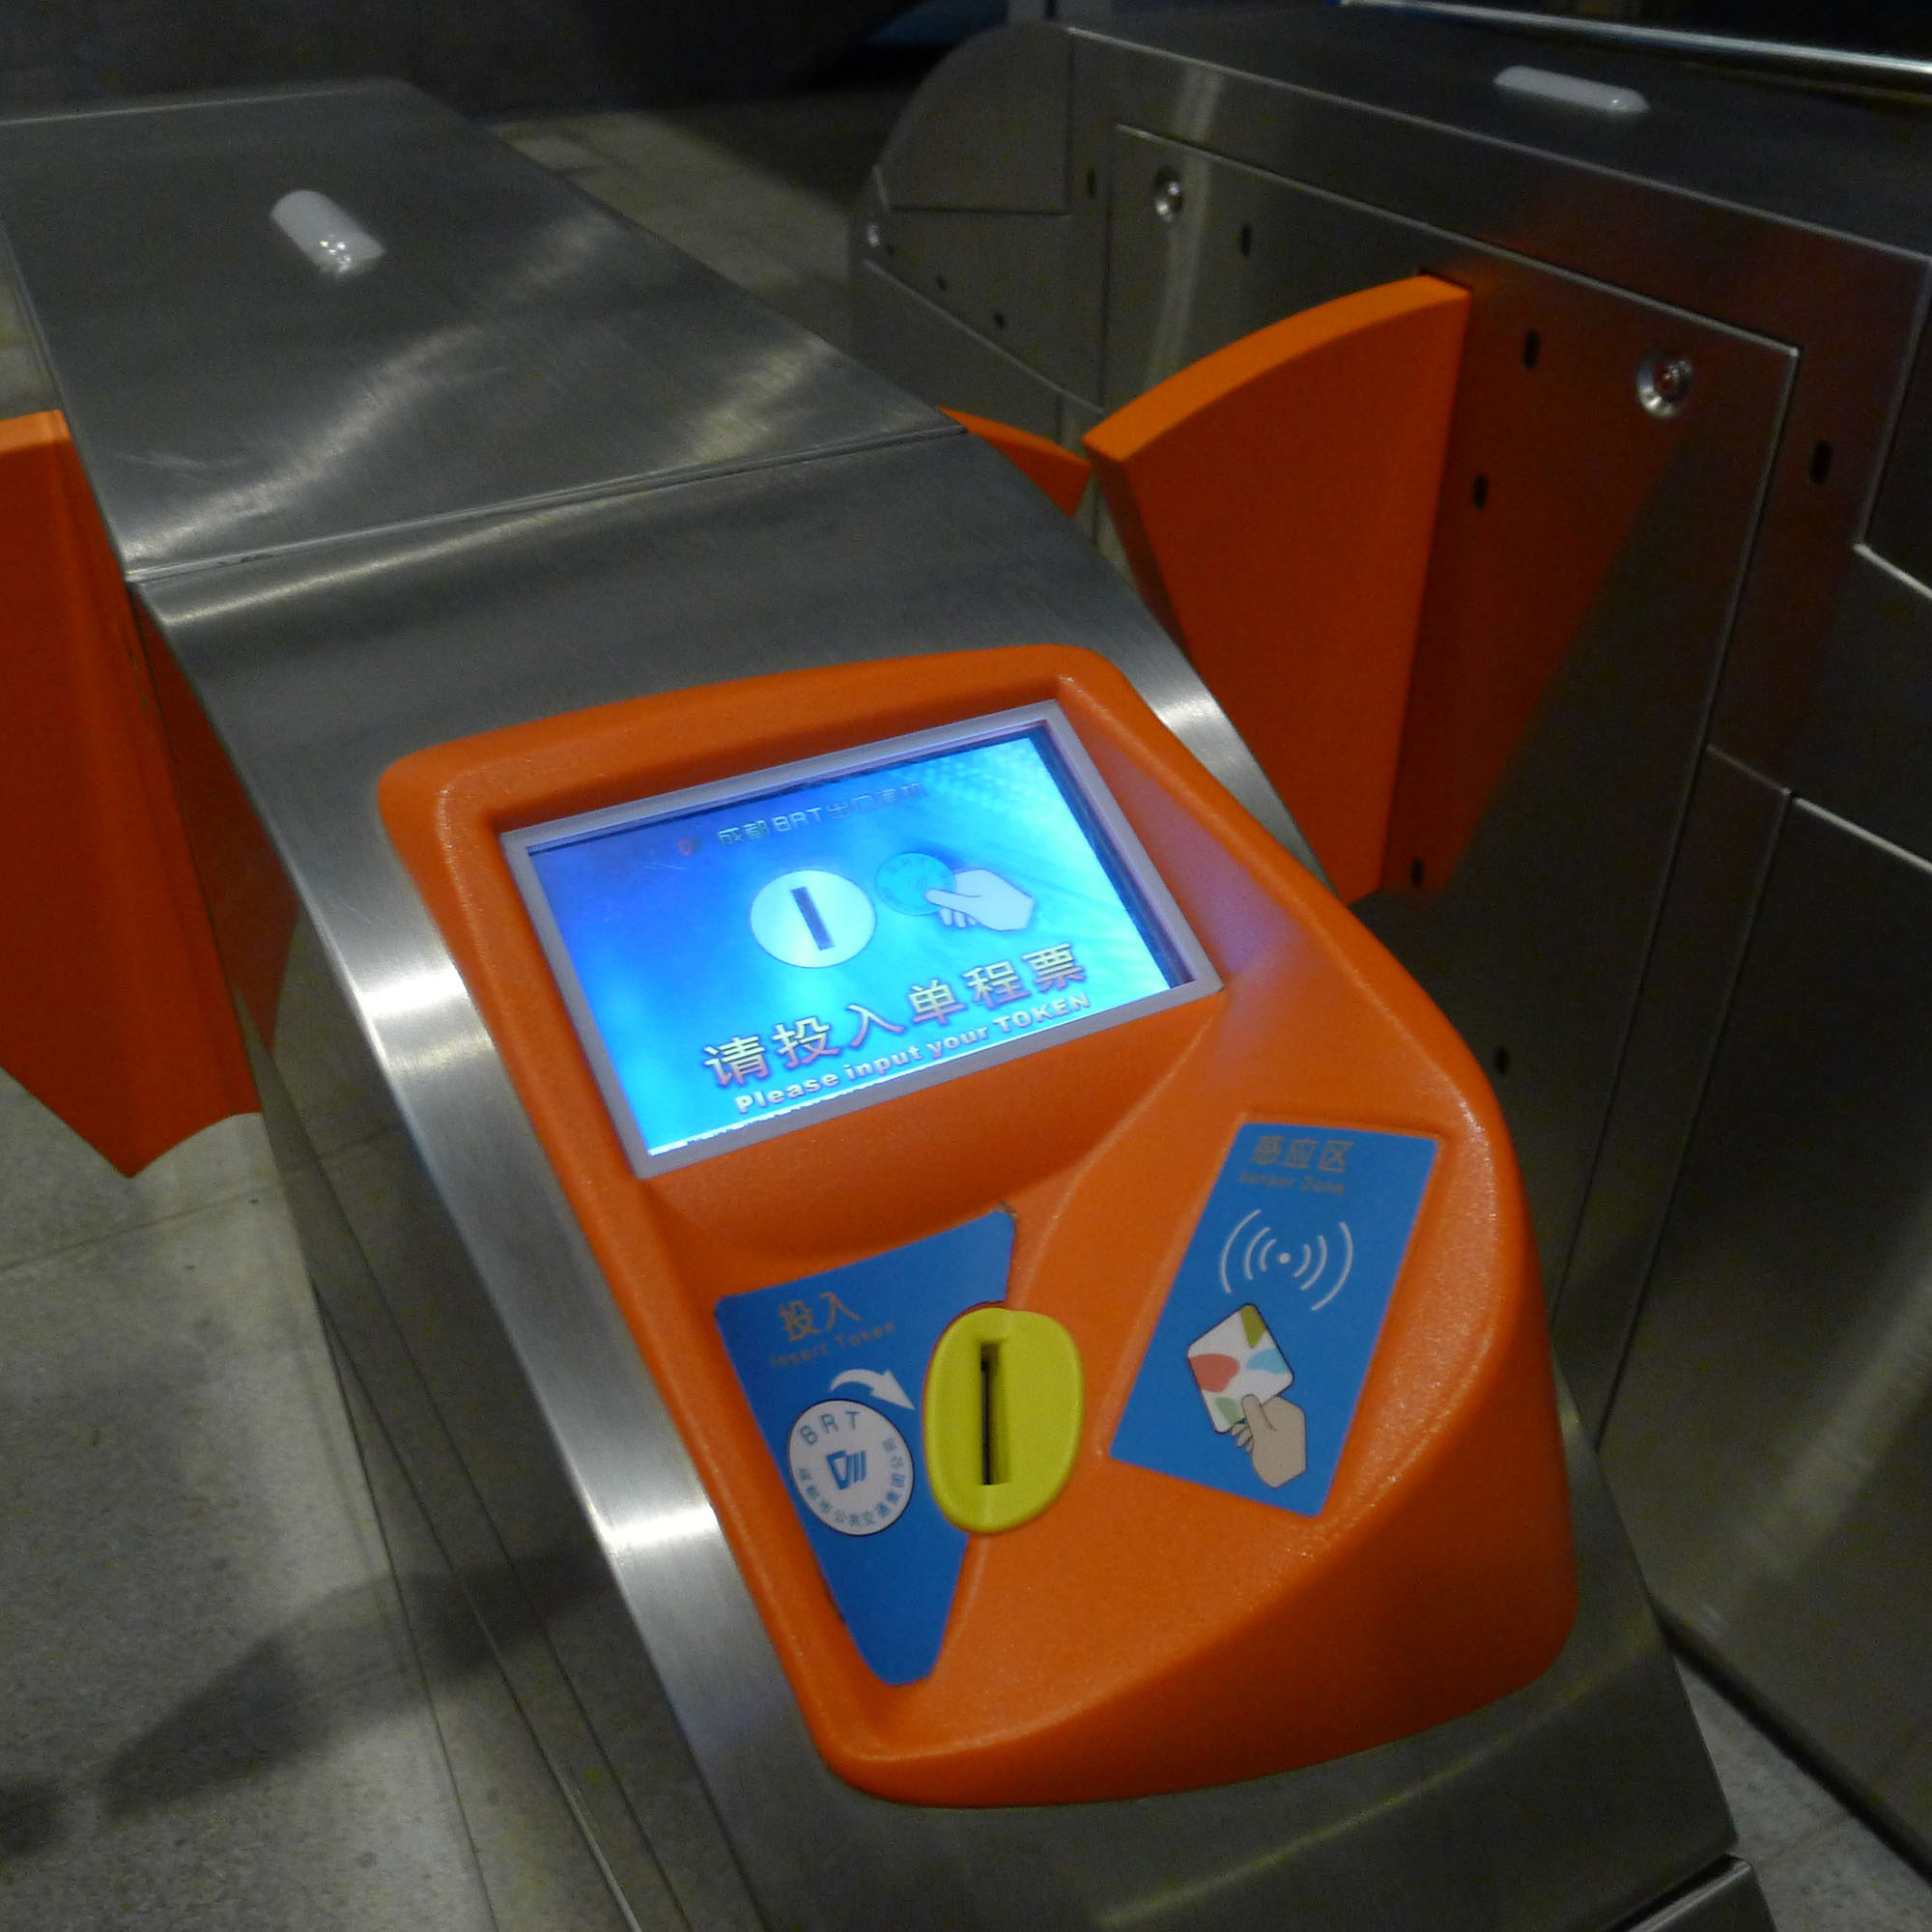 Fig. 18.4 A fare collection machine in Chengdu, China, that accepts tokens and smart cards.